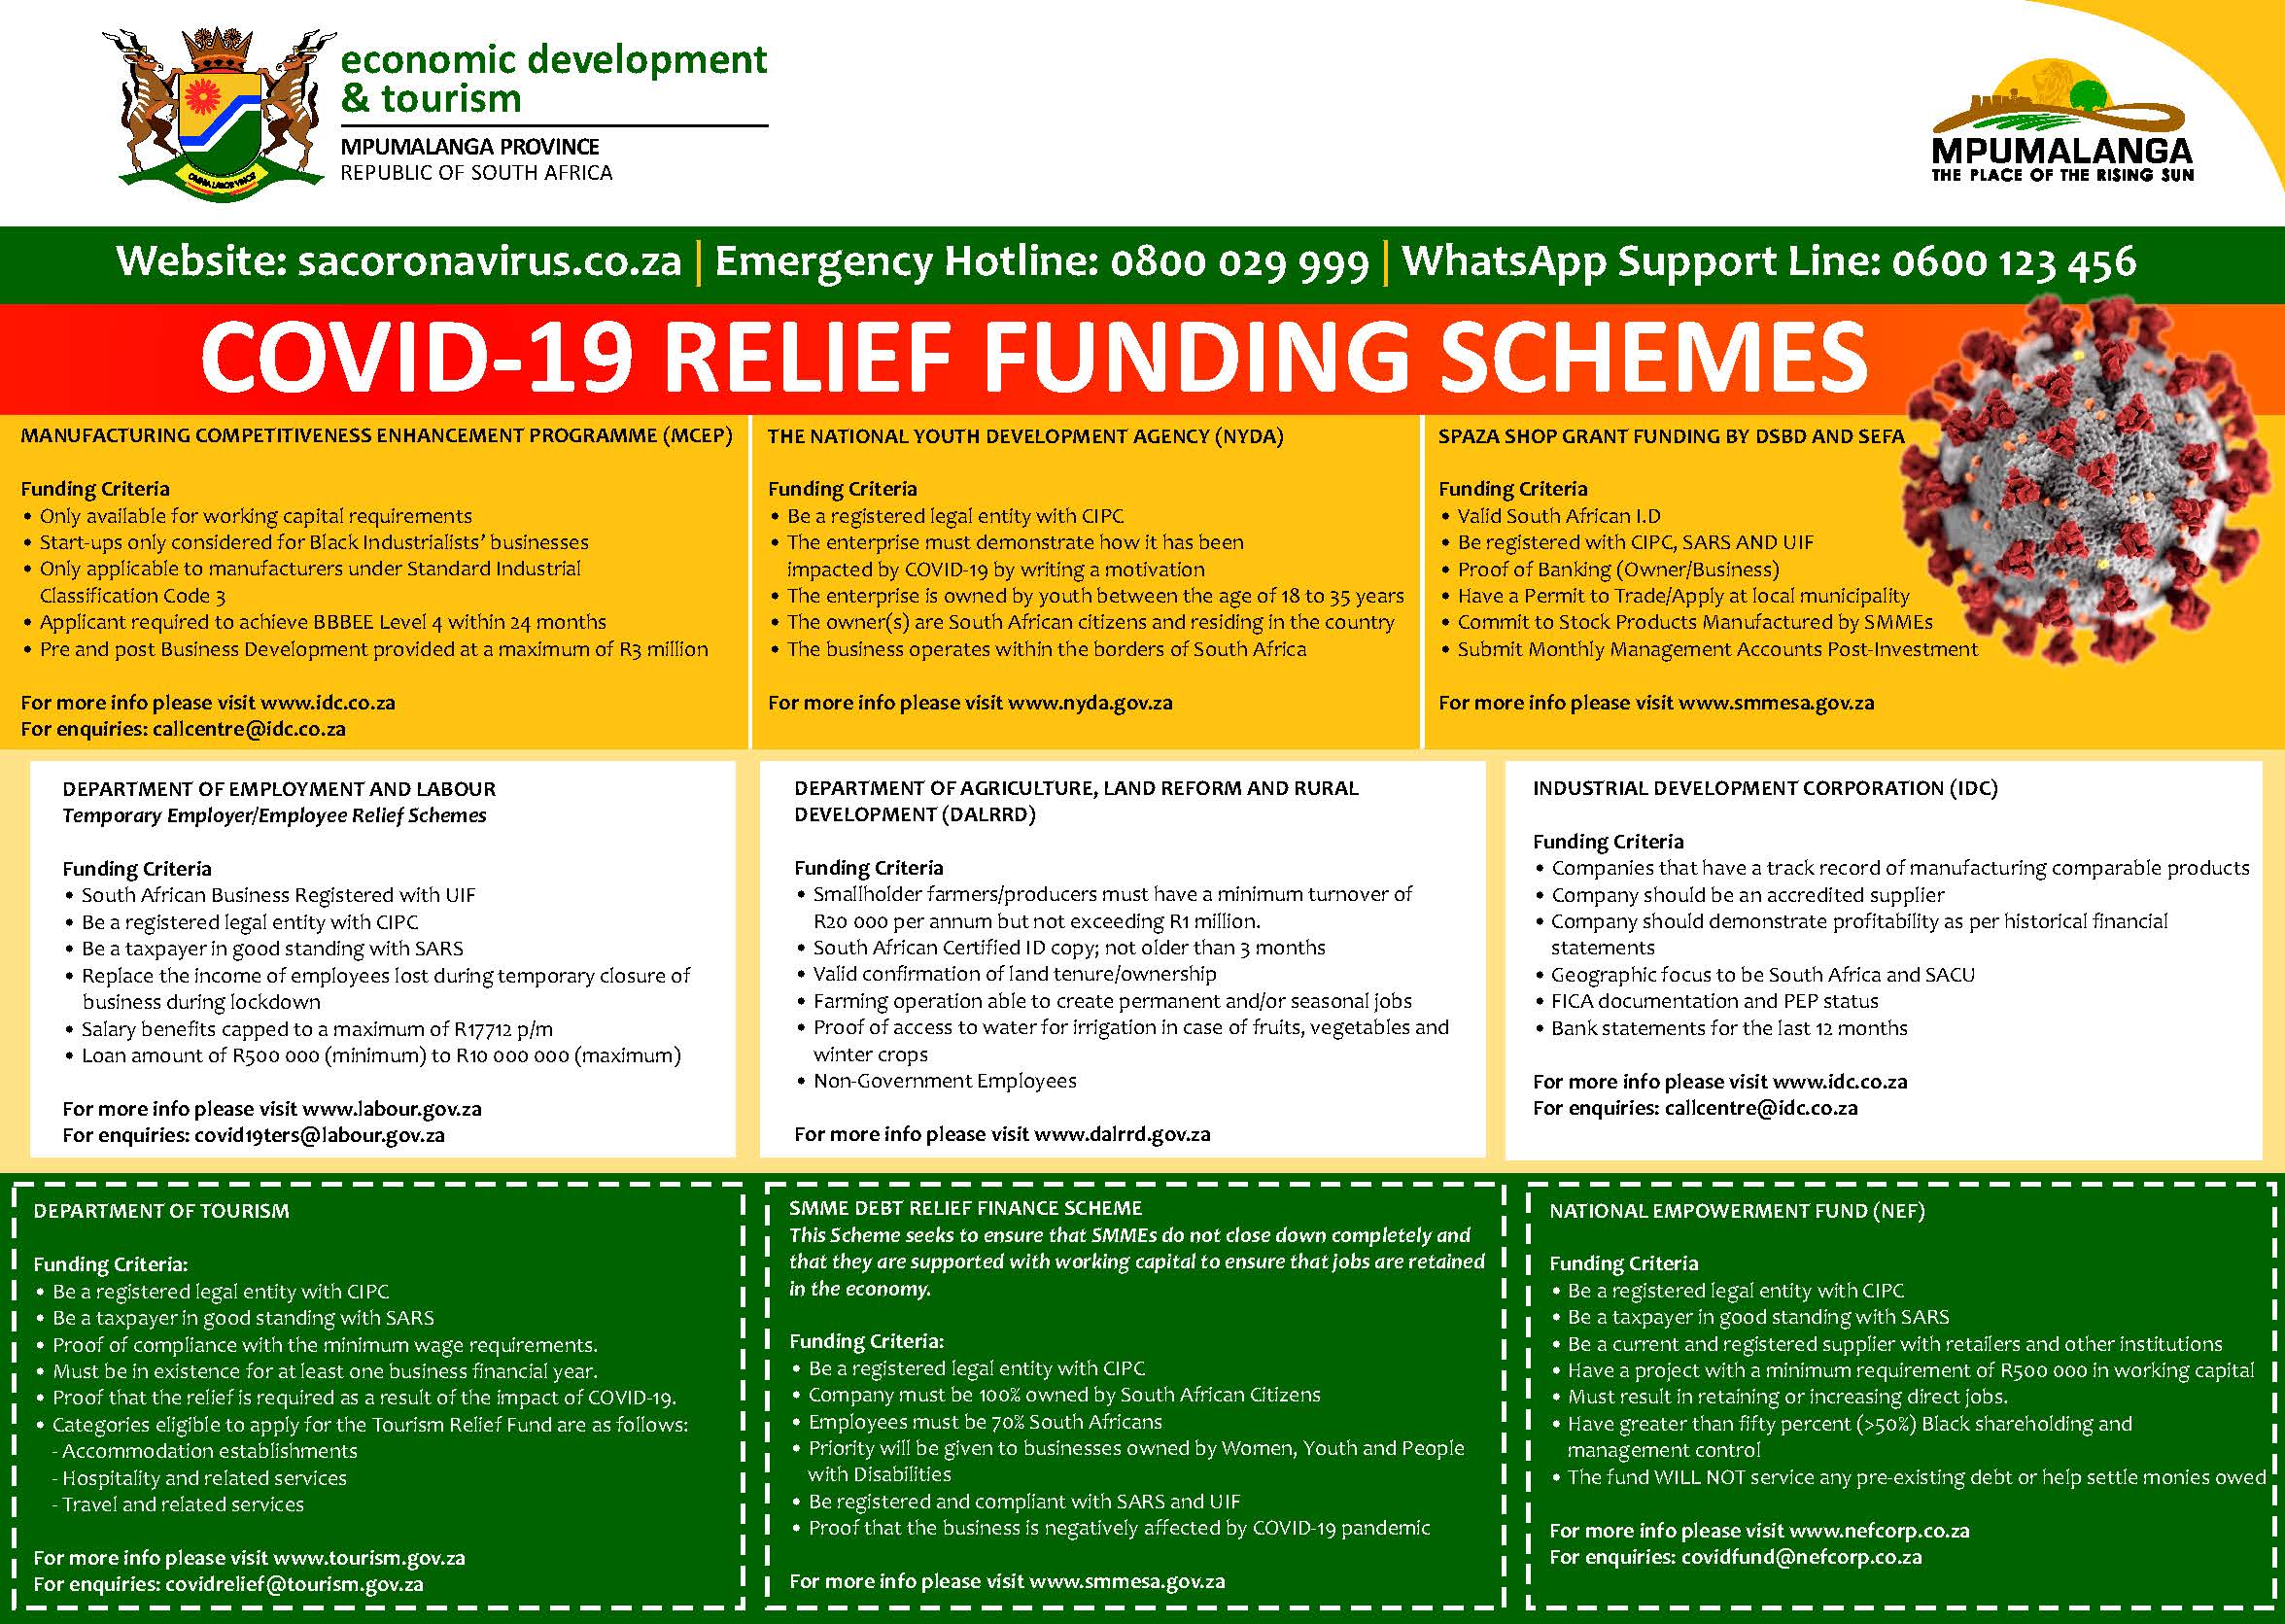 COVID-19 Relief Funding Schemes